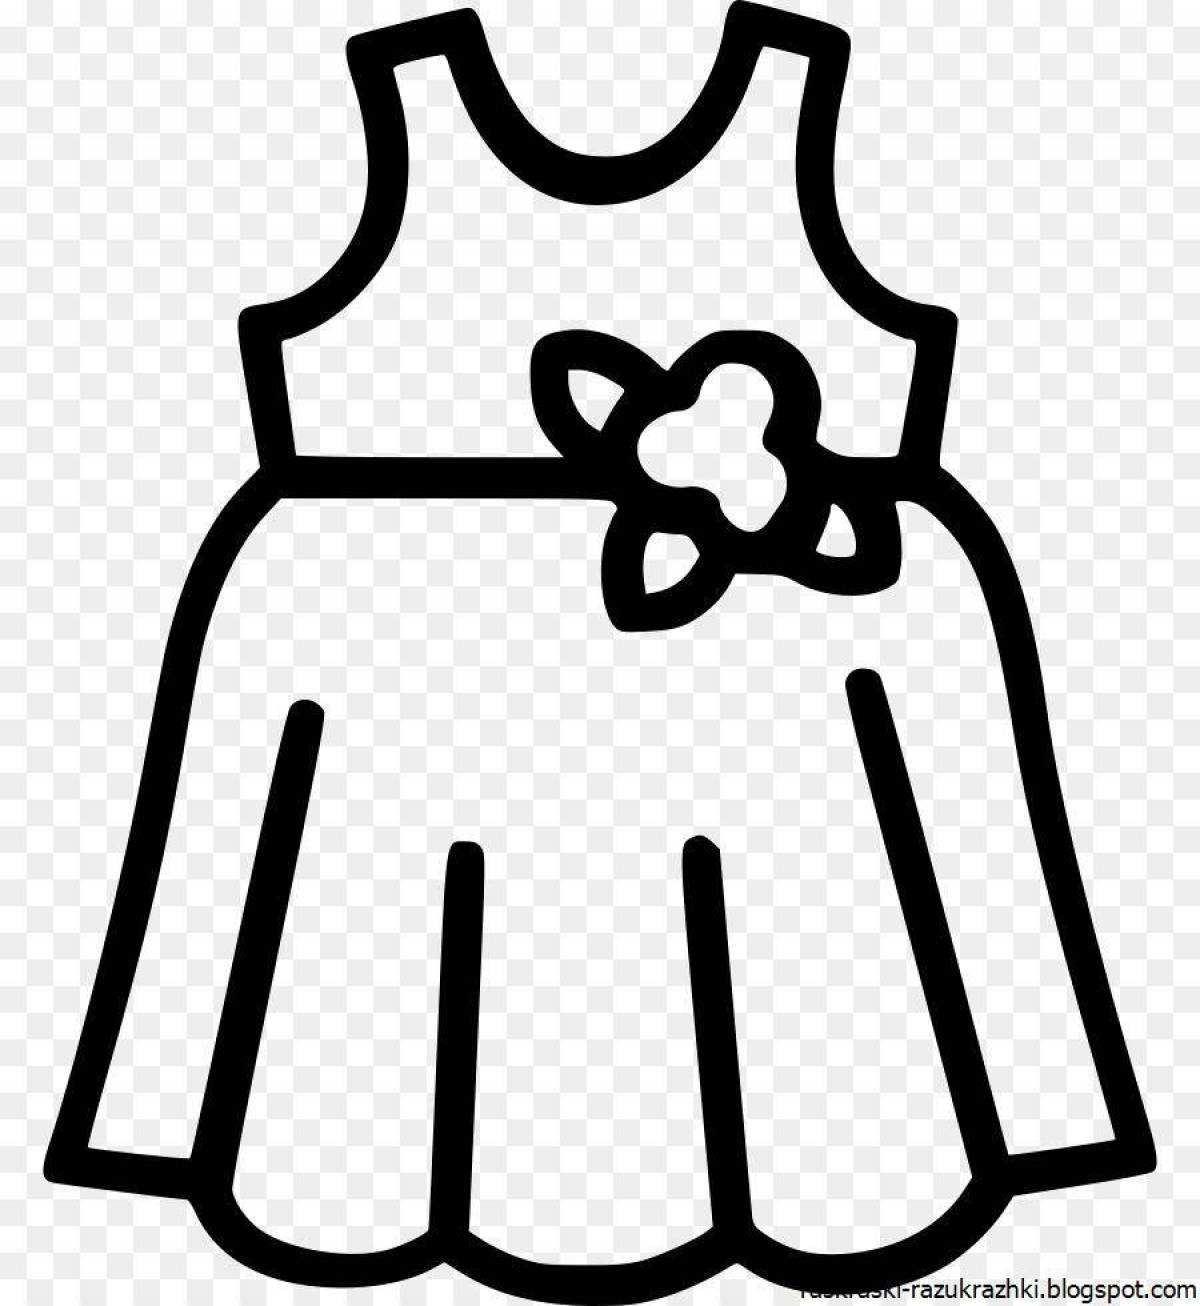 Adorable dress coloring page for kids